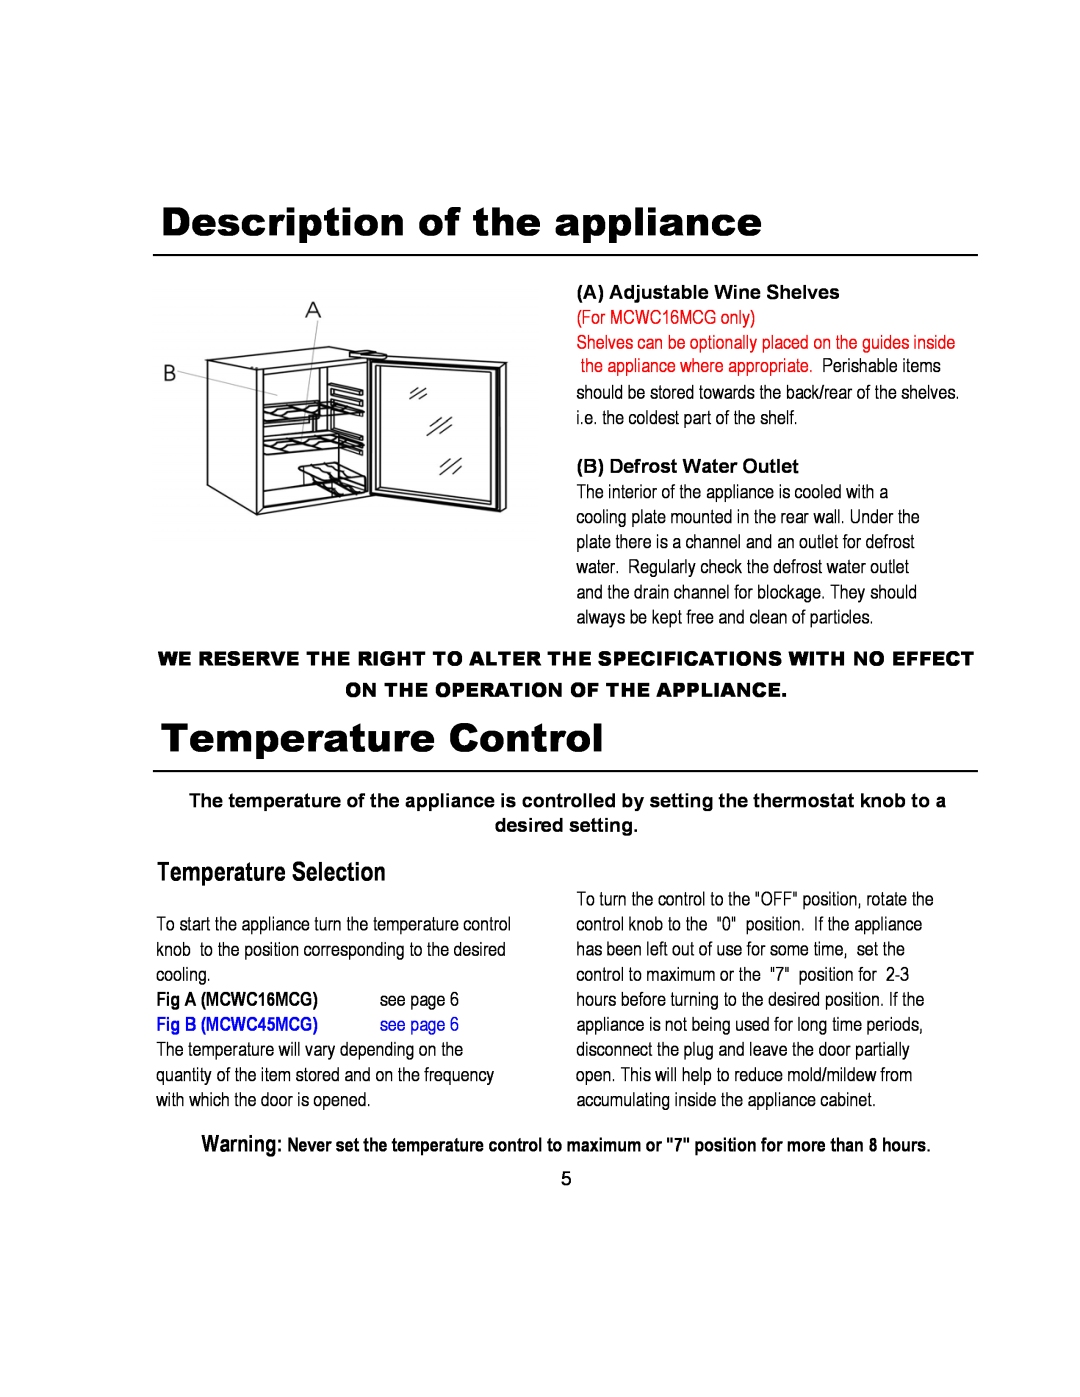 Magic Chef MCWC45MCG Description of the appliance, Temperature Control, Temperature Selection, B Defrost Water Outlet 